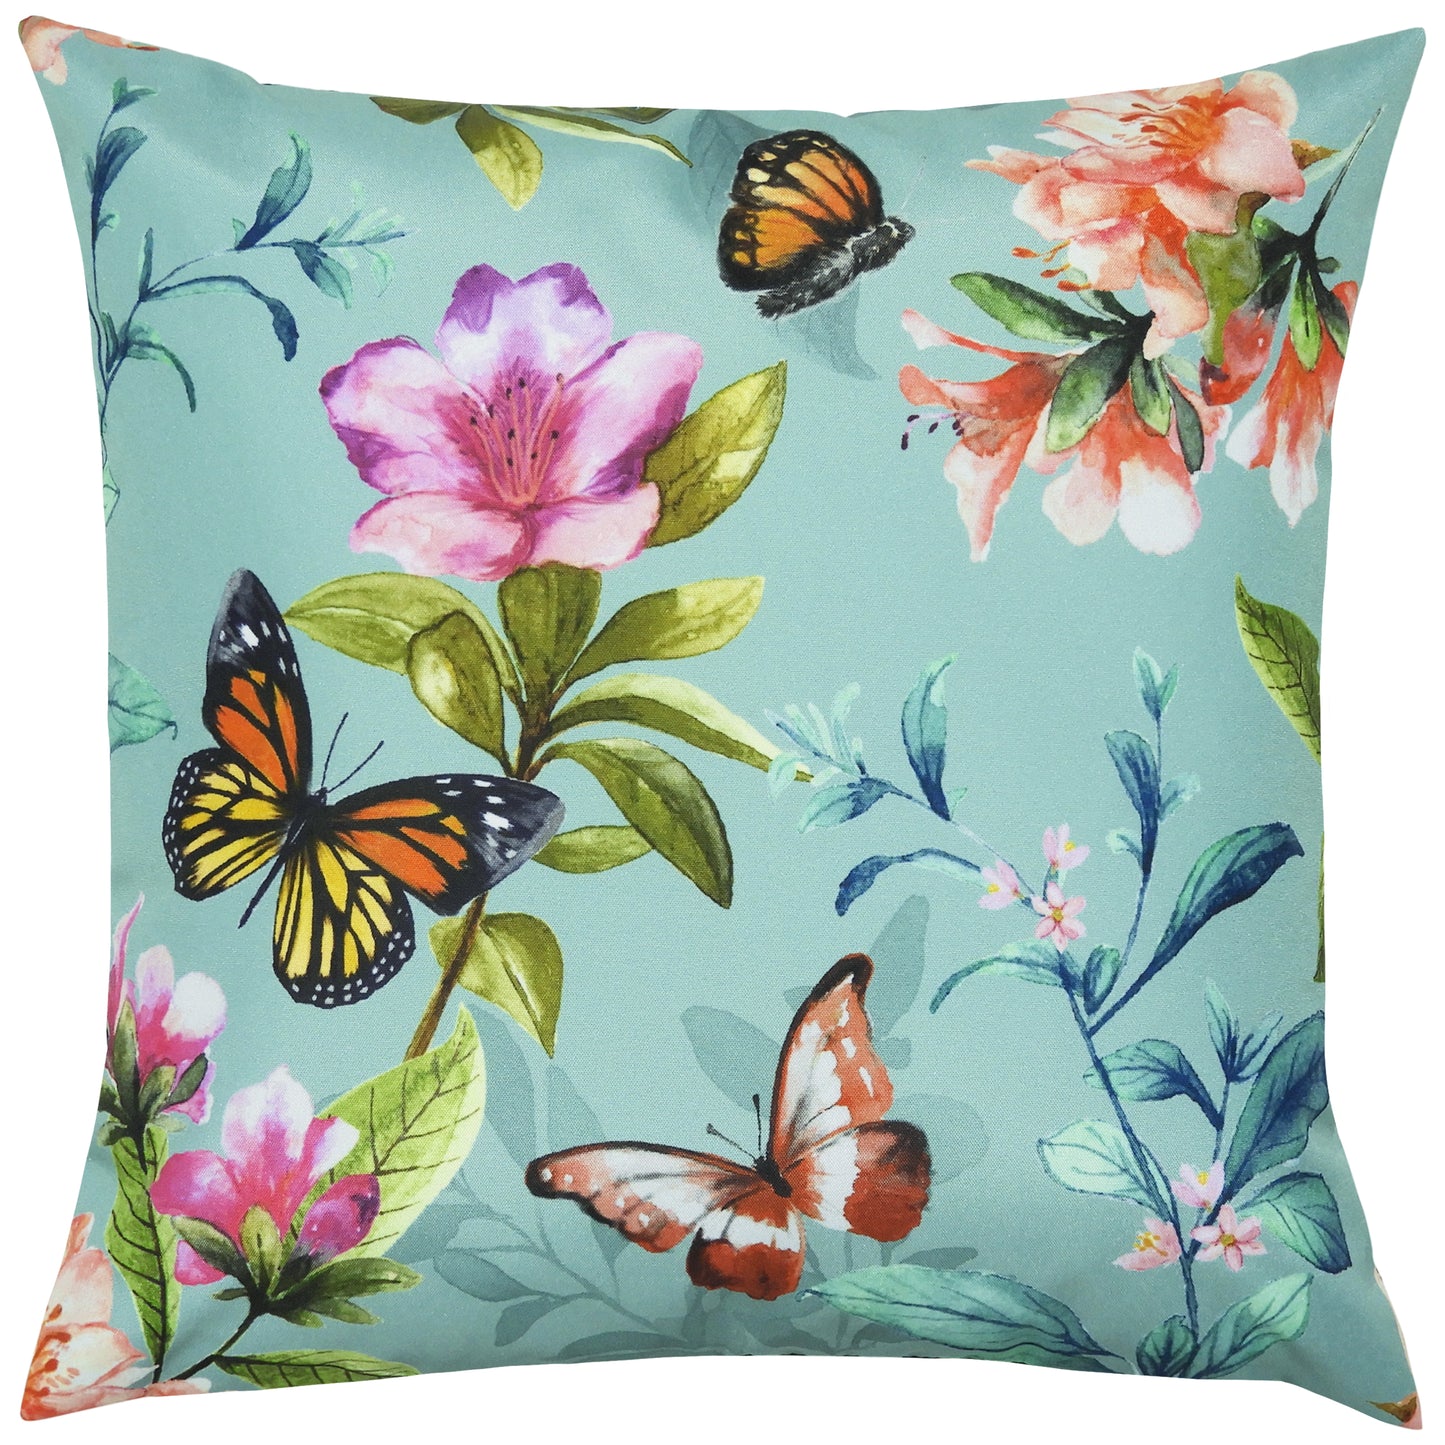 Decorative Outdoor Cushion "Butterfly" - ON SALE NOW!